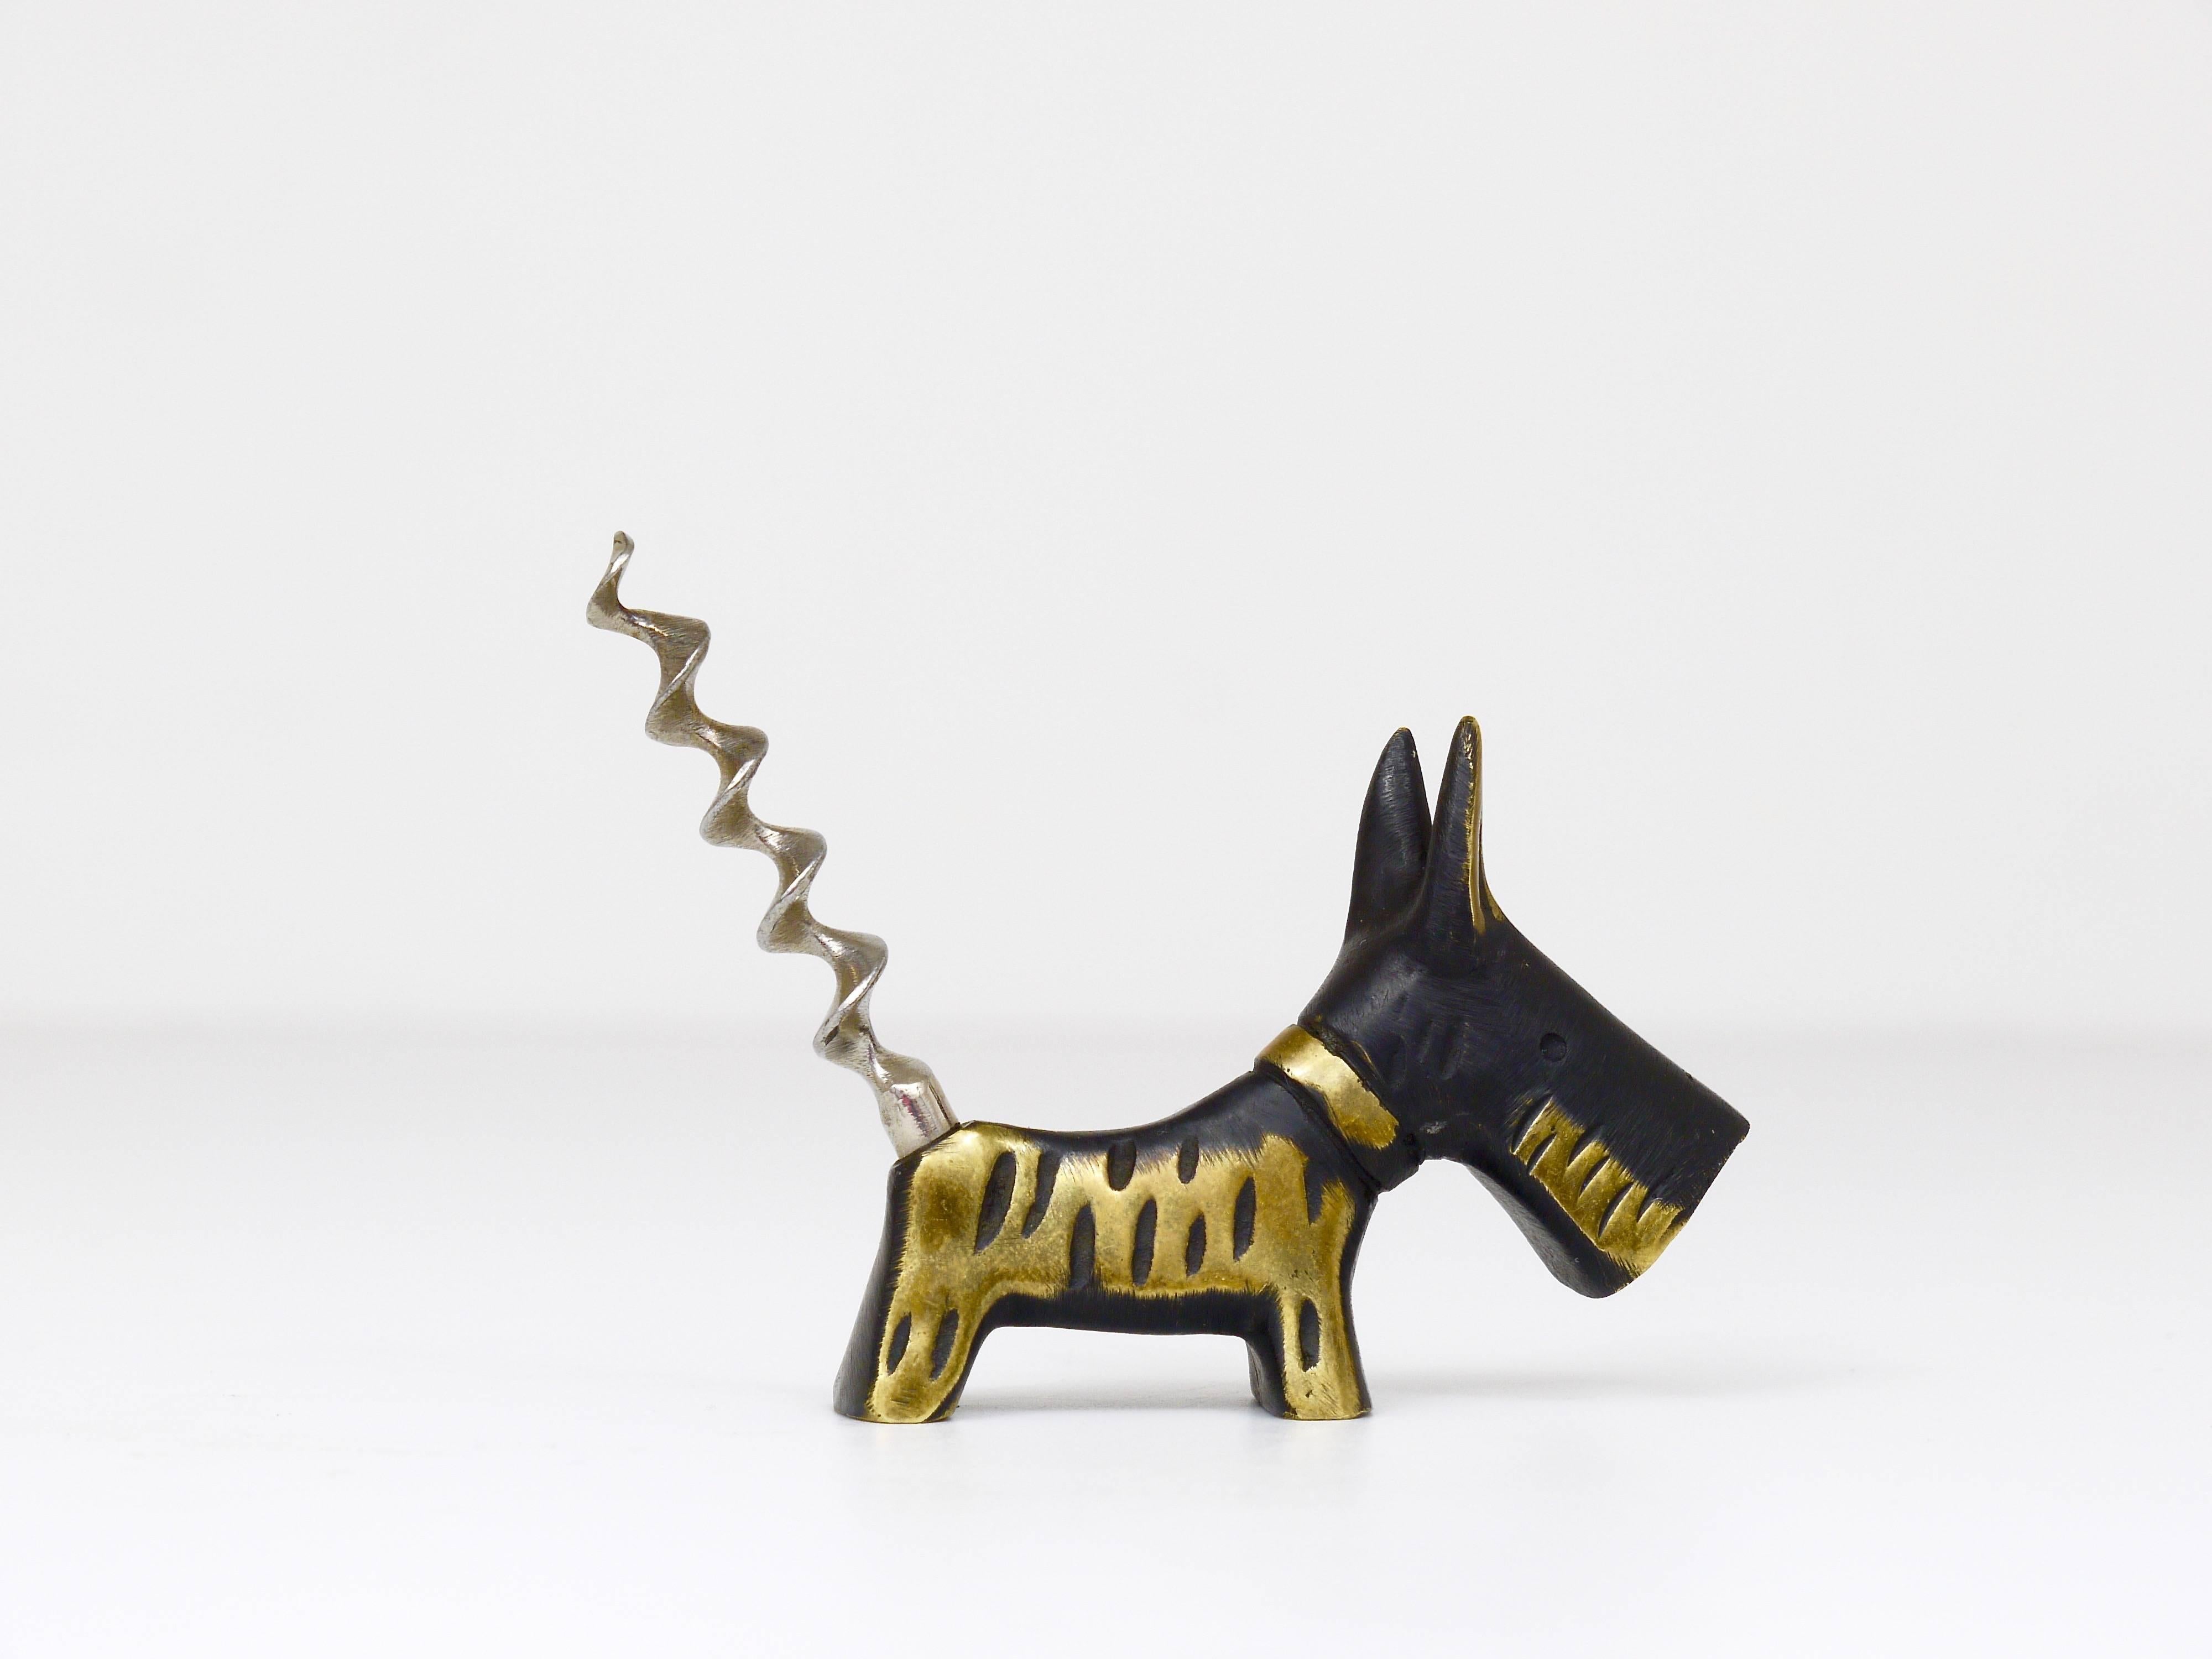 A charming Austrian corkscrew bottle opener, displaying a nice scotch terrier. A very humorous design by Walter Bosse, executed by Hertha Baller Austria in the 1950s. Made of brass, in very good condition, marked.